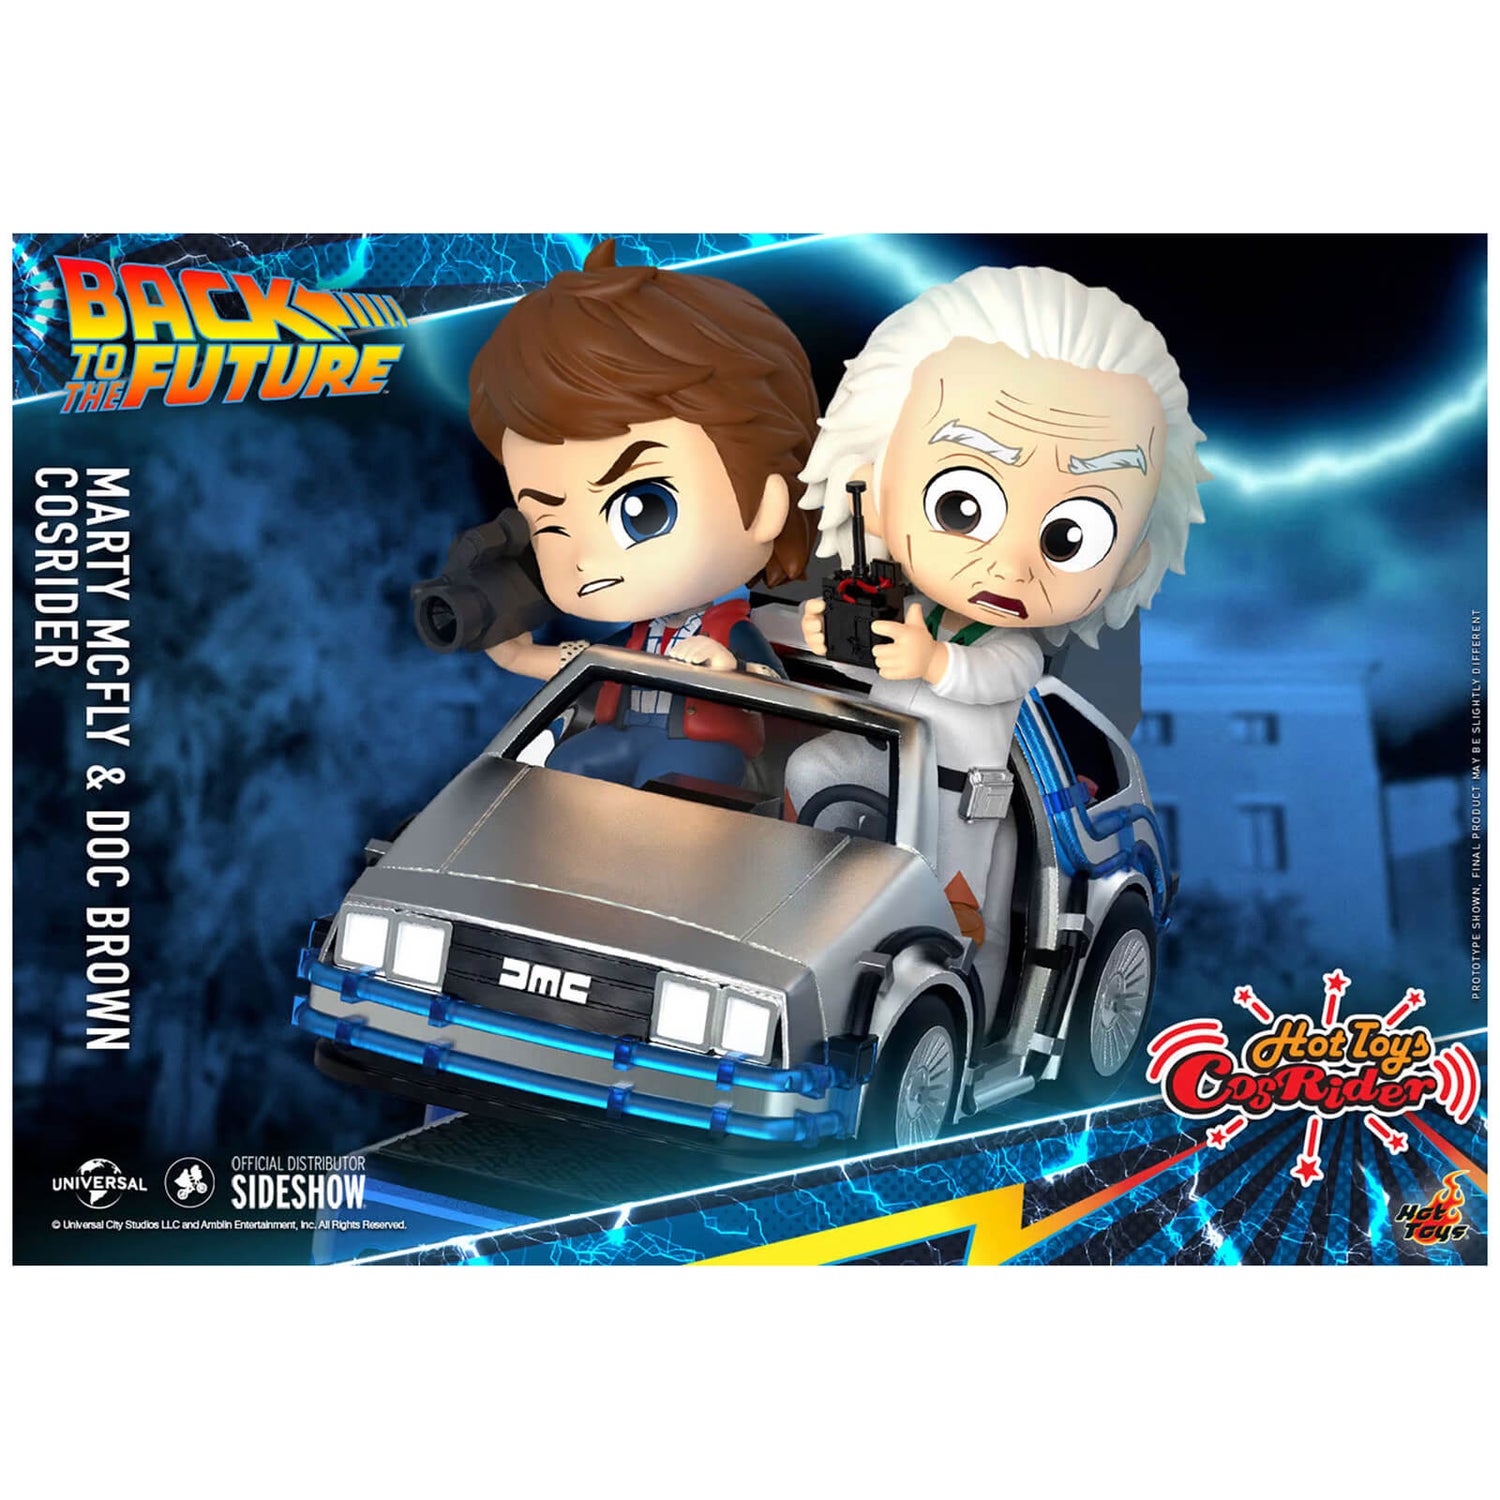 CosRider - Back to the Future - Marty McFly & Doc Brown [Movie / Back to the Future]